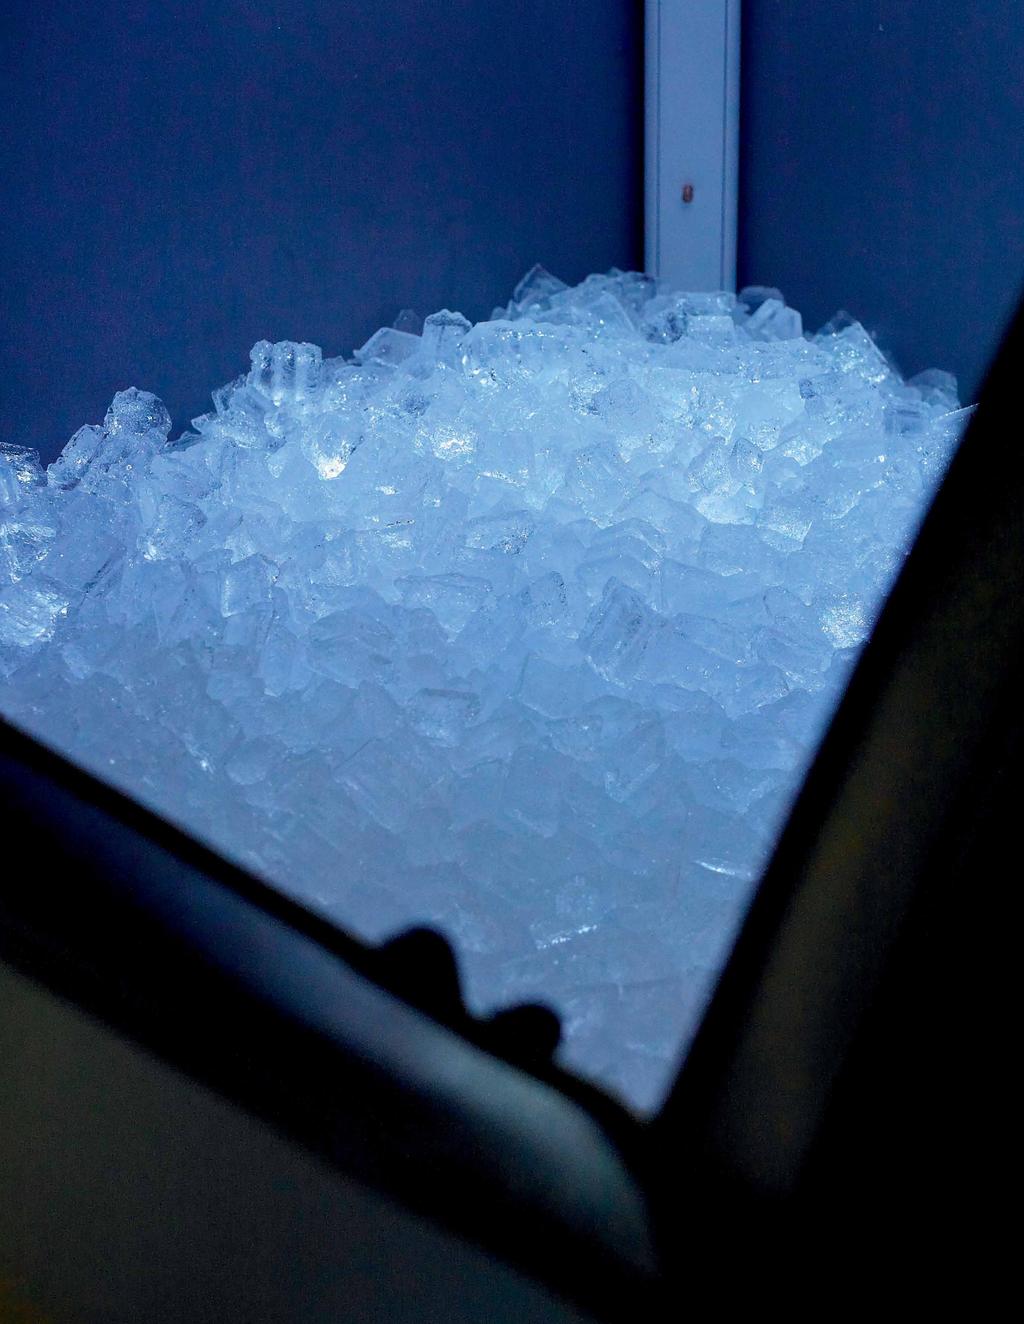 Ice Assurance Ice is always there, where and when you need it Whether you need 300 pounds of ice or 3,000 pounds, the